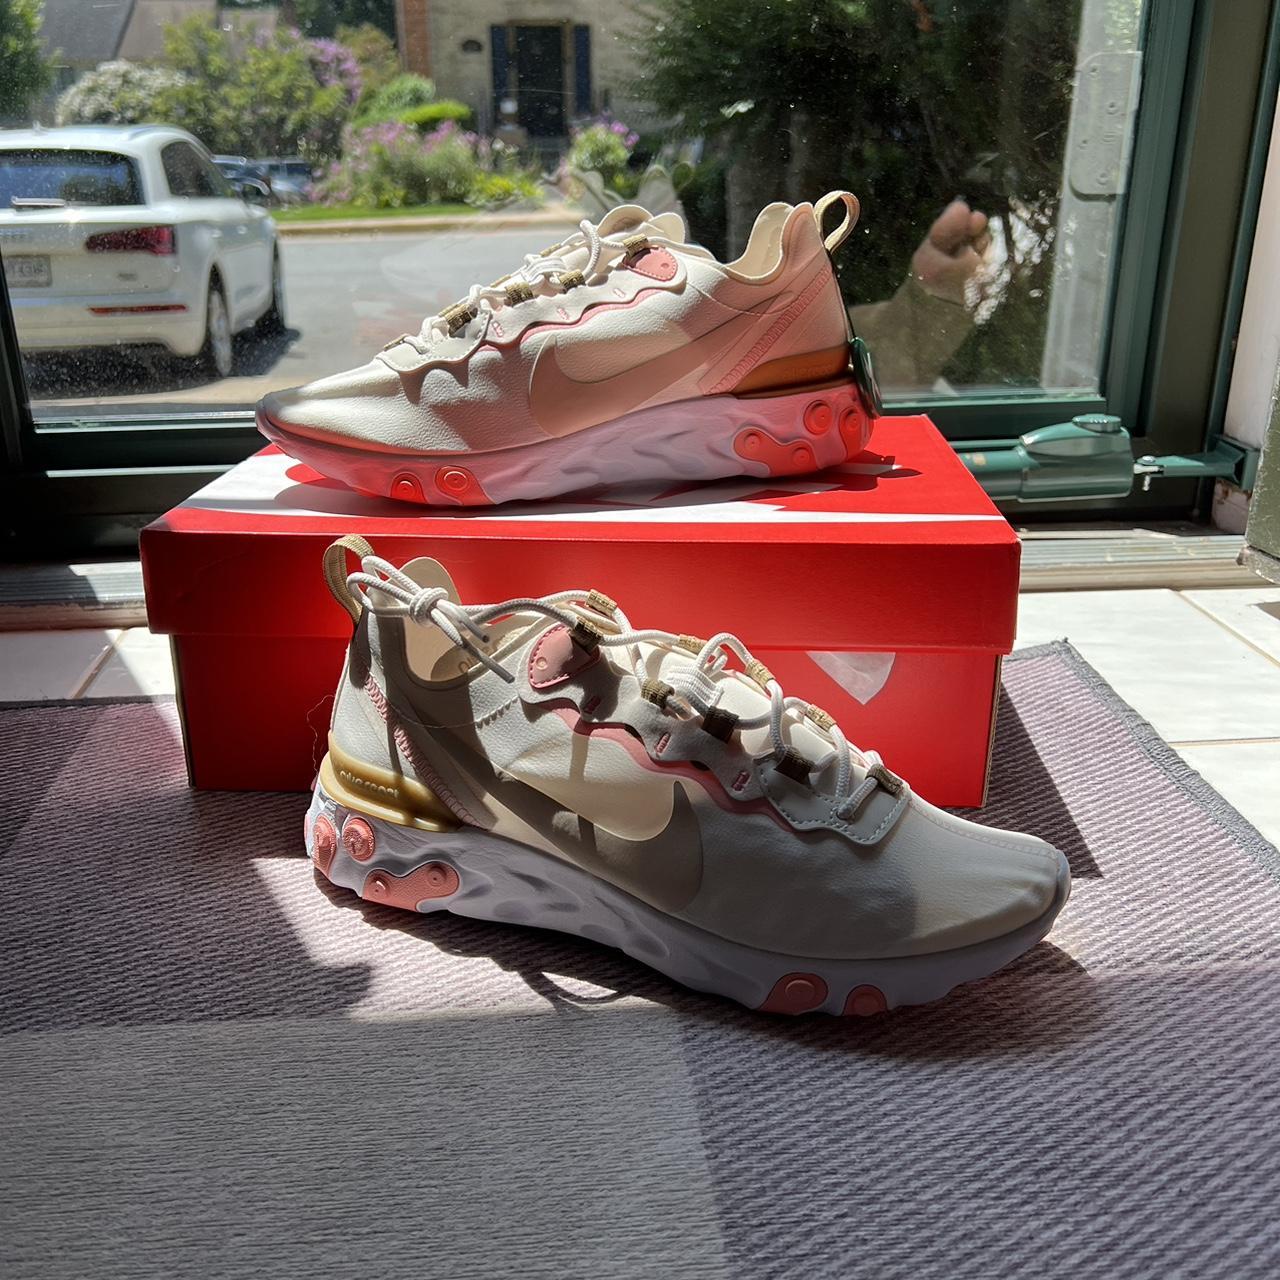 Nike React Element 55 sneakers in white and pink